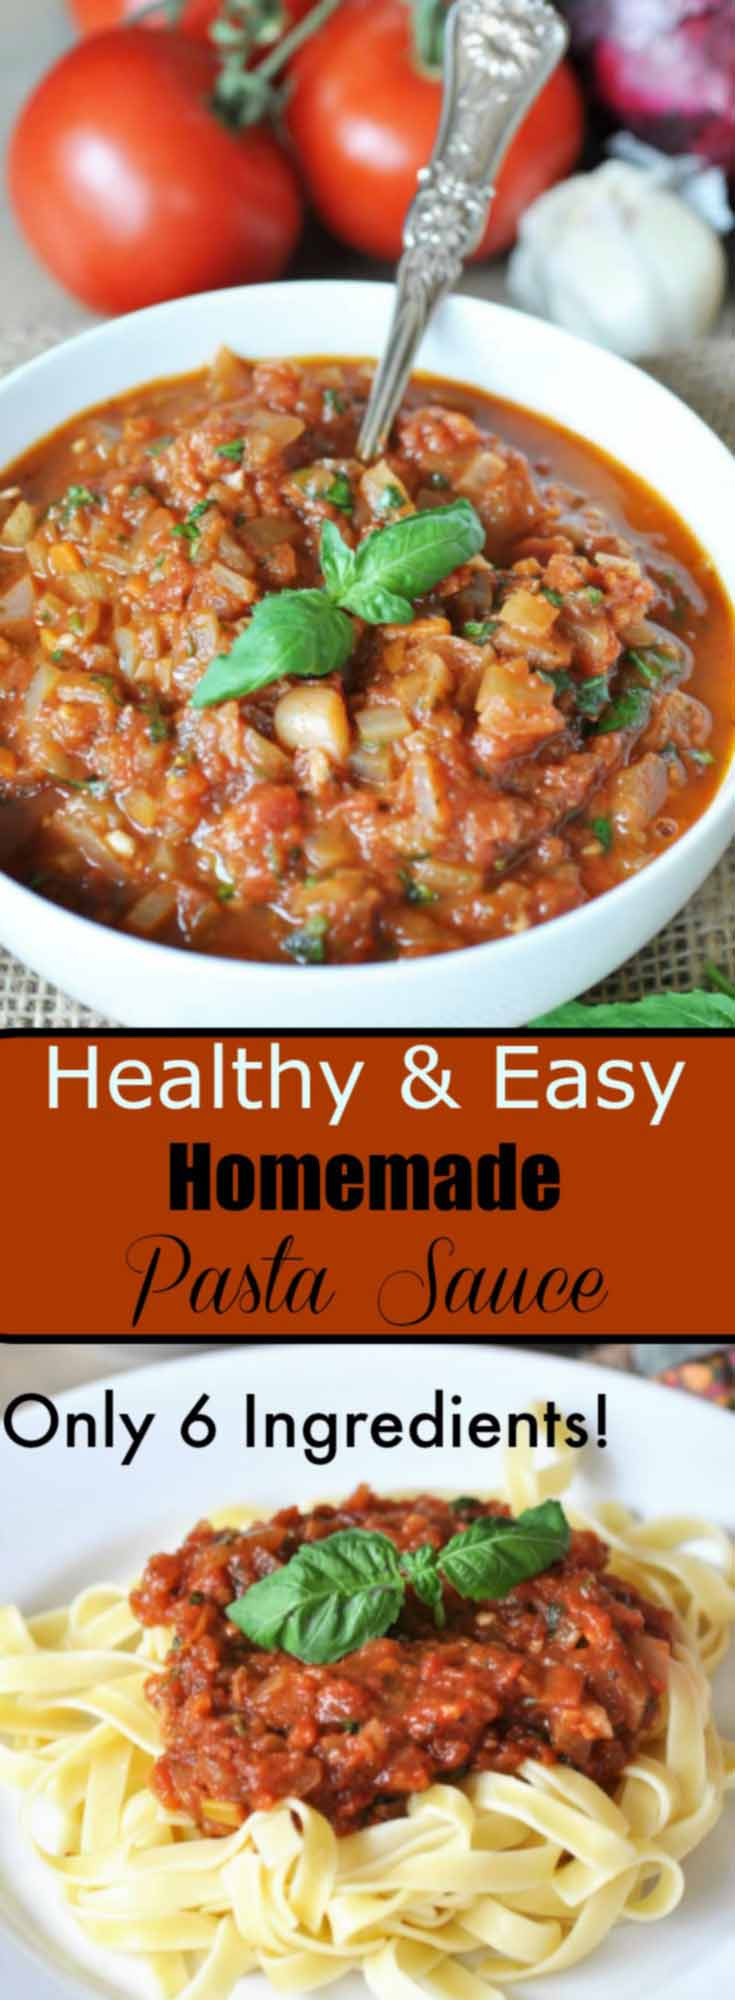 Simple Pasta Sauces
 Healthy and Easy Homemade Pasta Sauce Veganosity